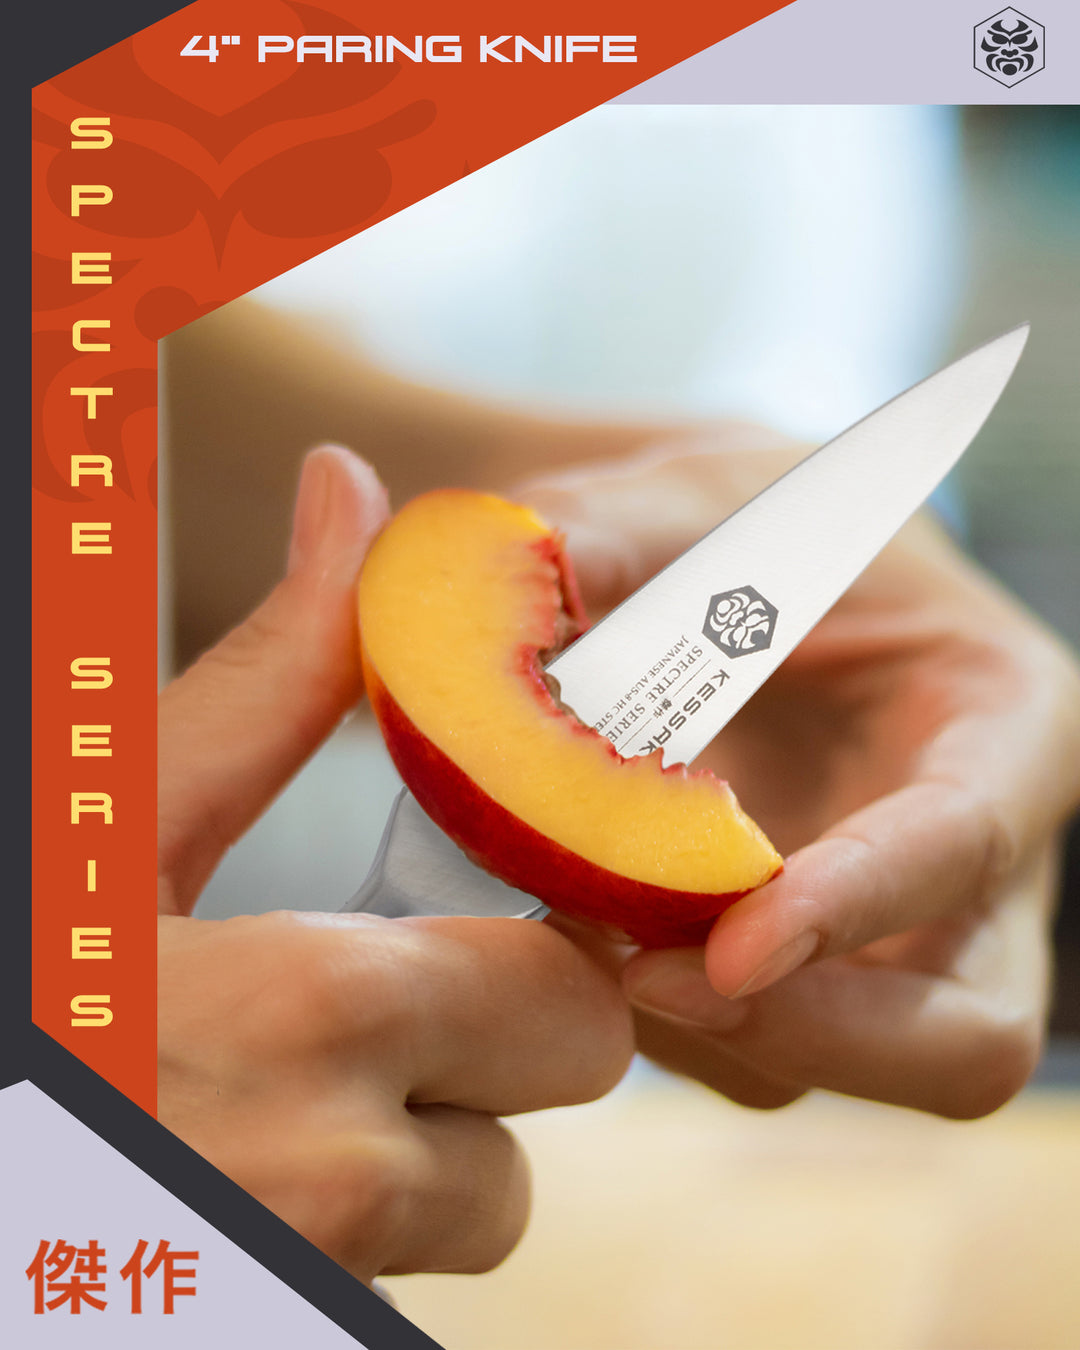 A woman slices a peach with the Spectre Paring Knife